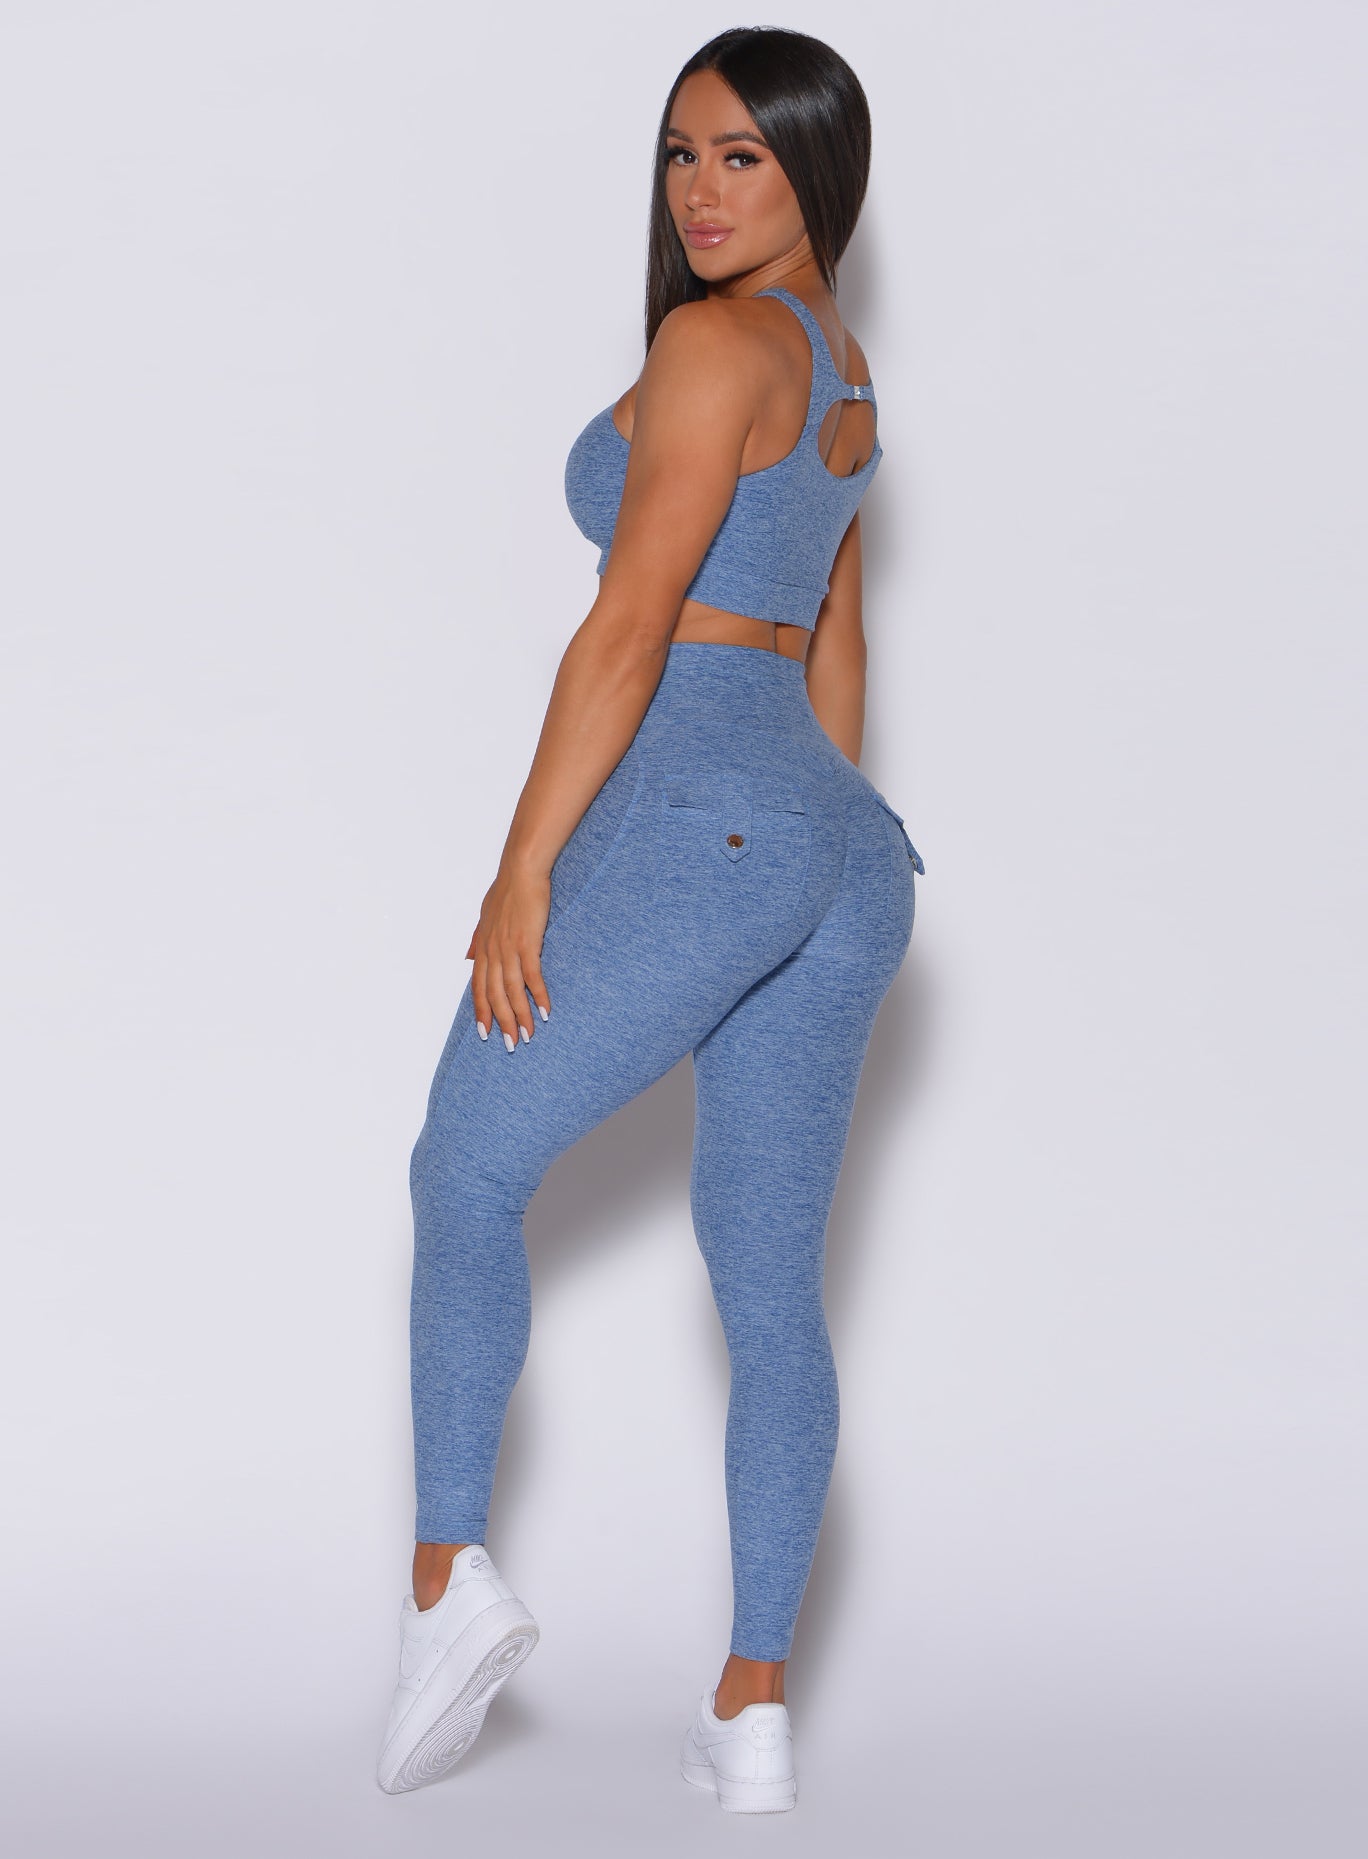 Left side profile view of a model in our Pocket Pop Leggings in sky blue color and a matching sports bra